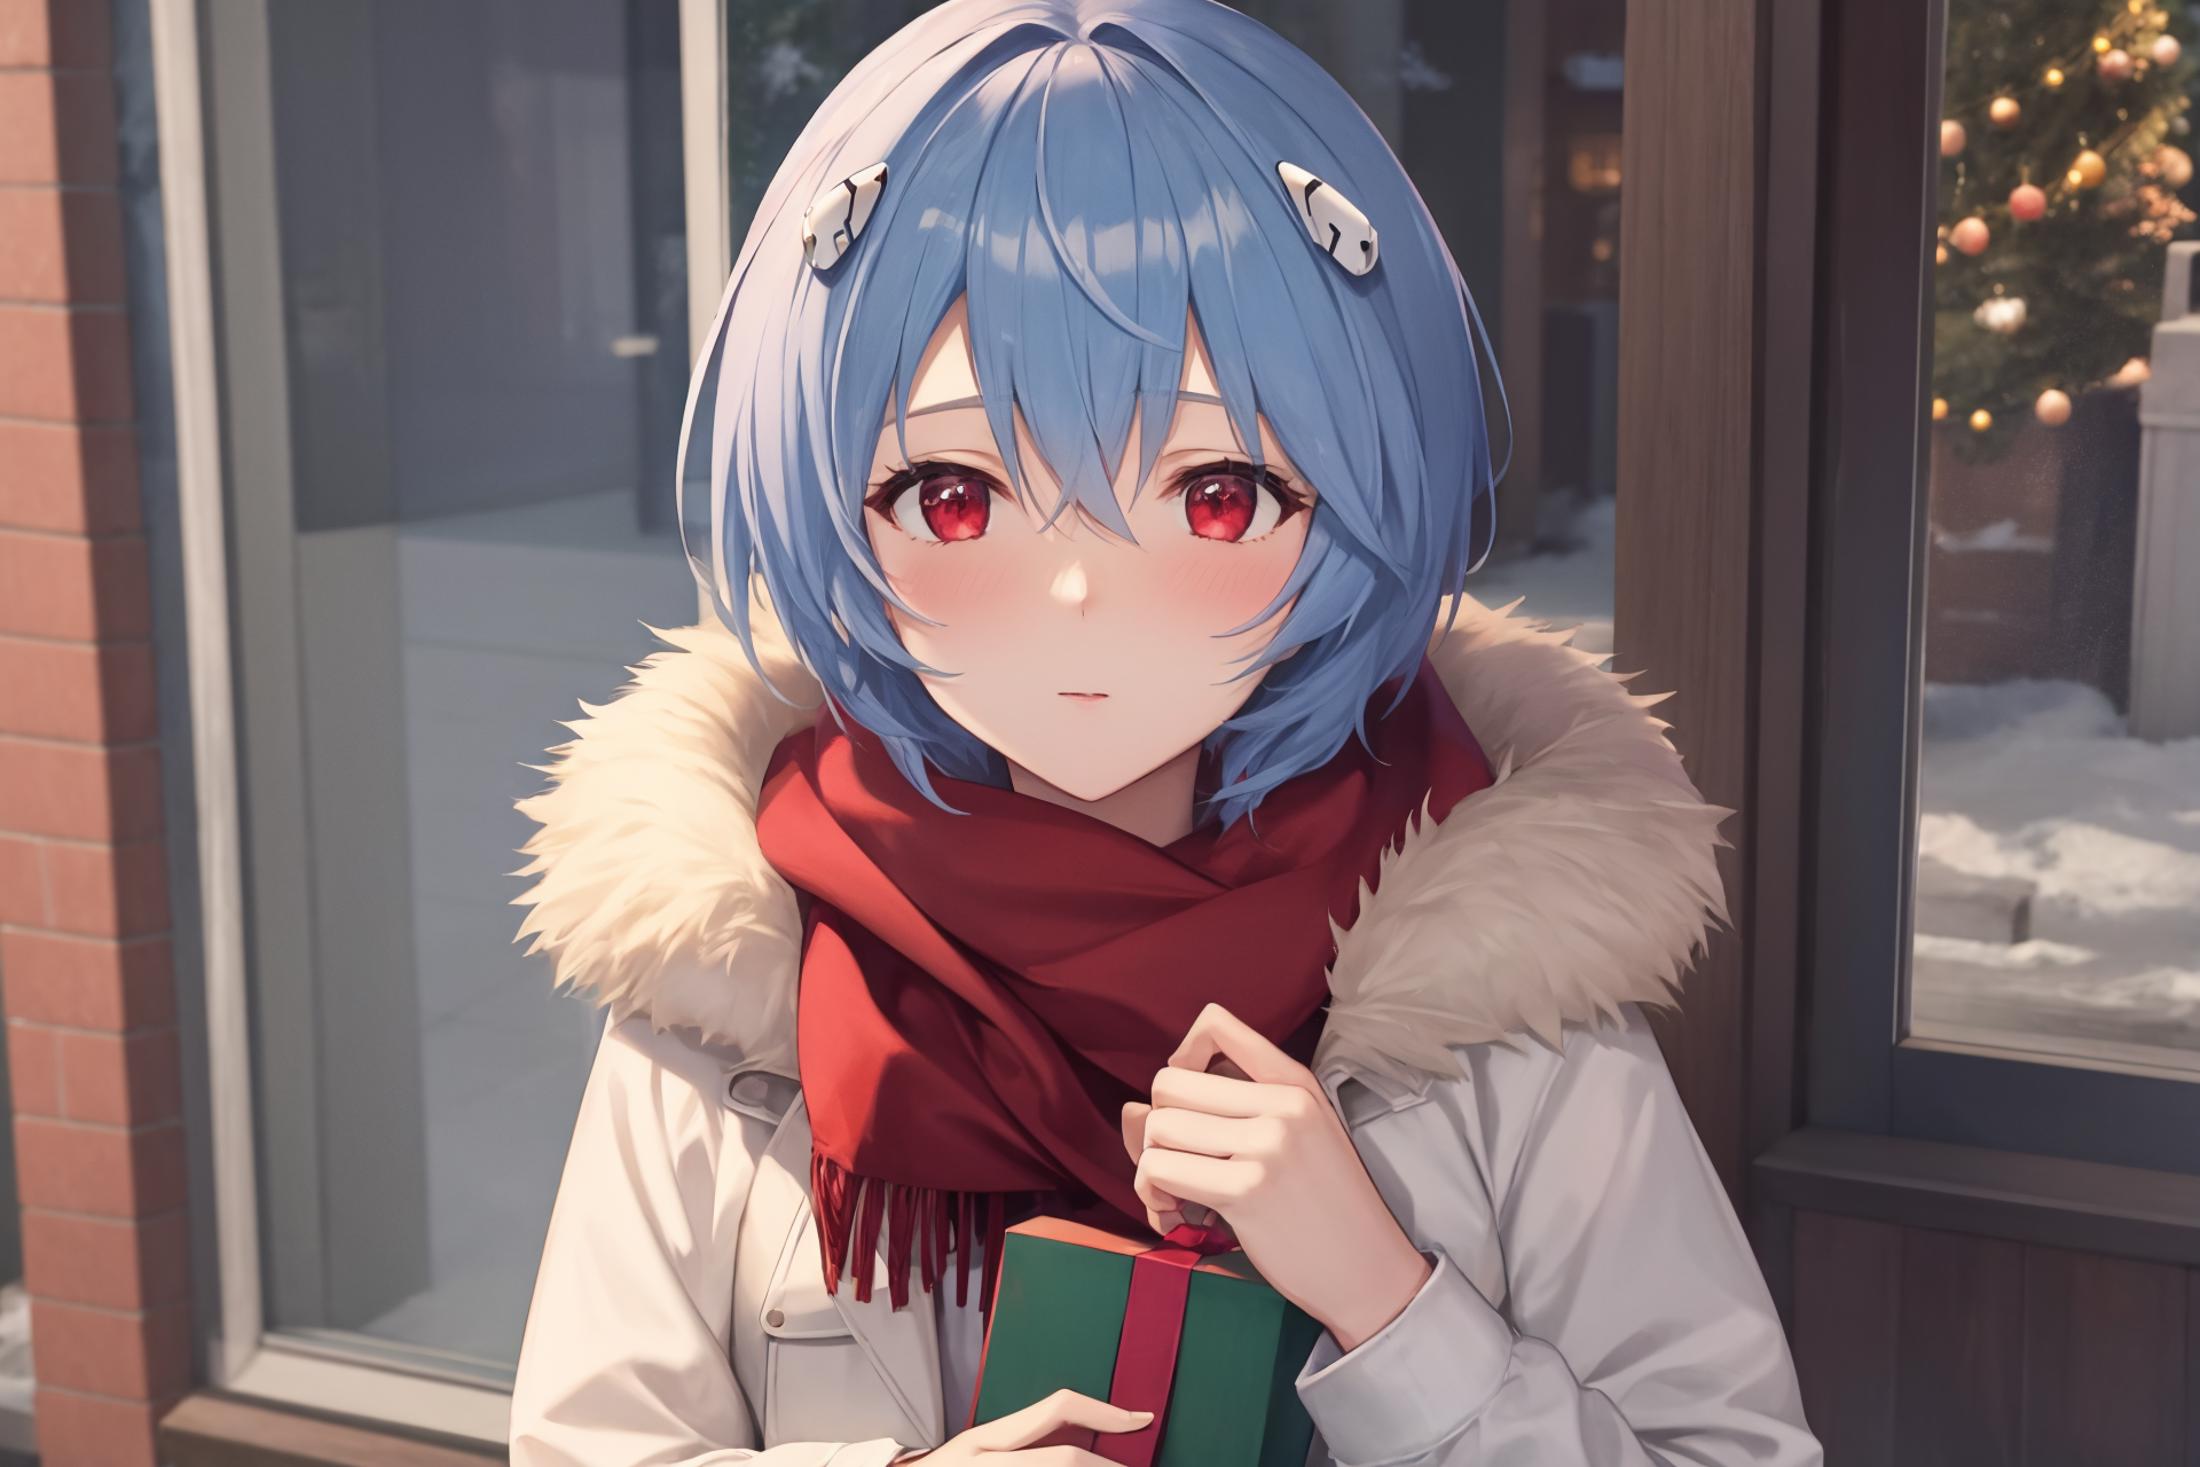 Anime girl in winter coat holding a Christmas present.